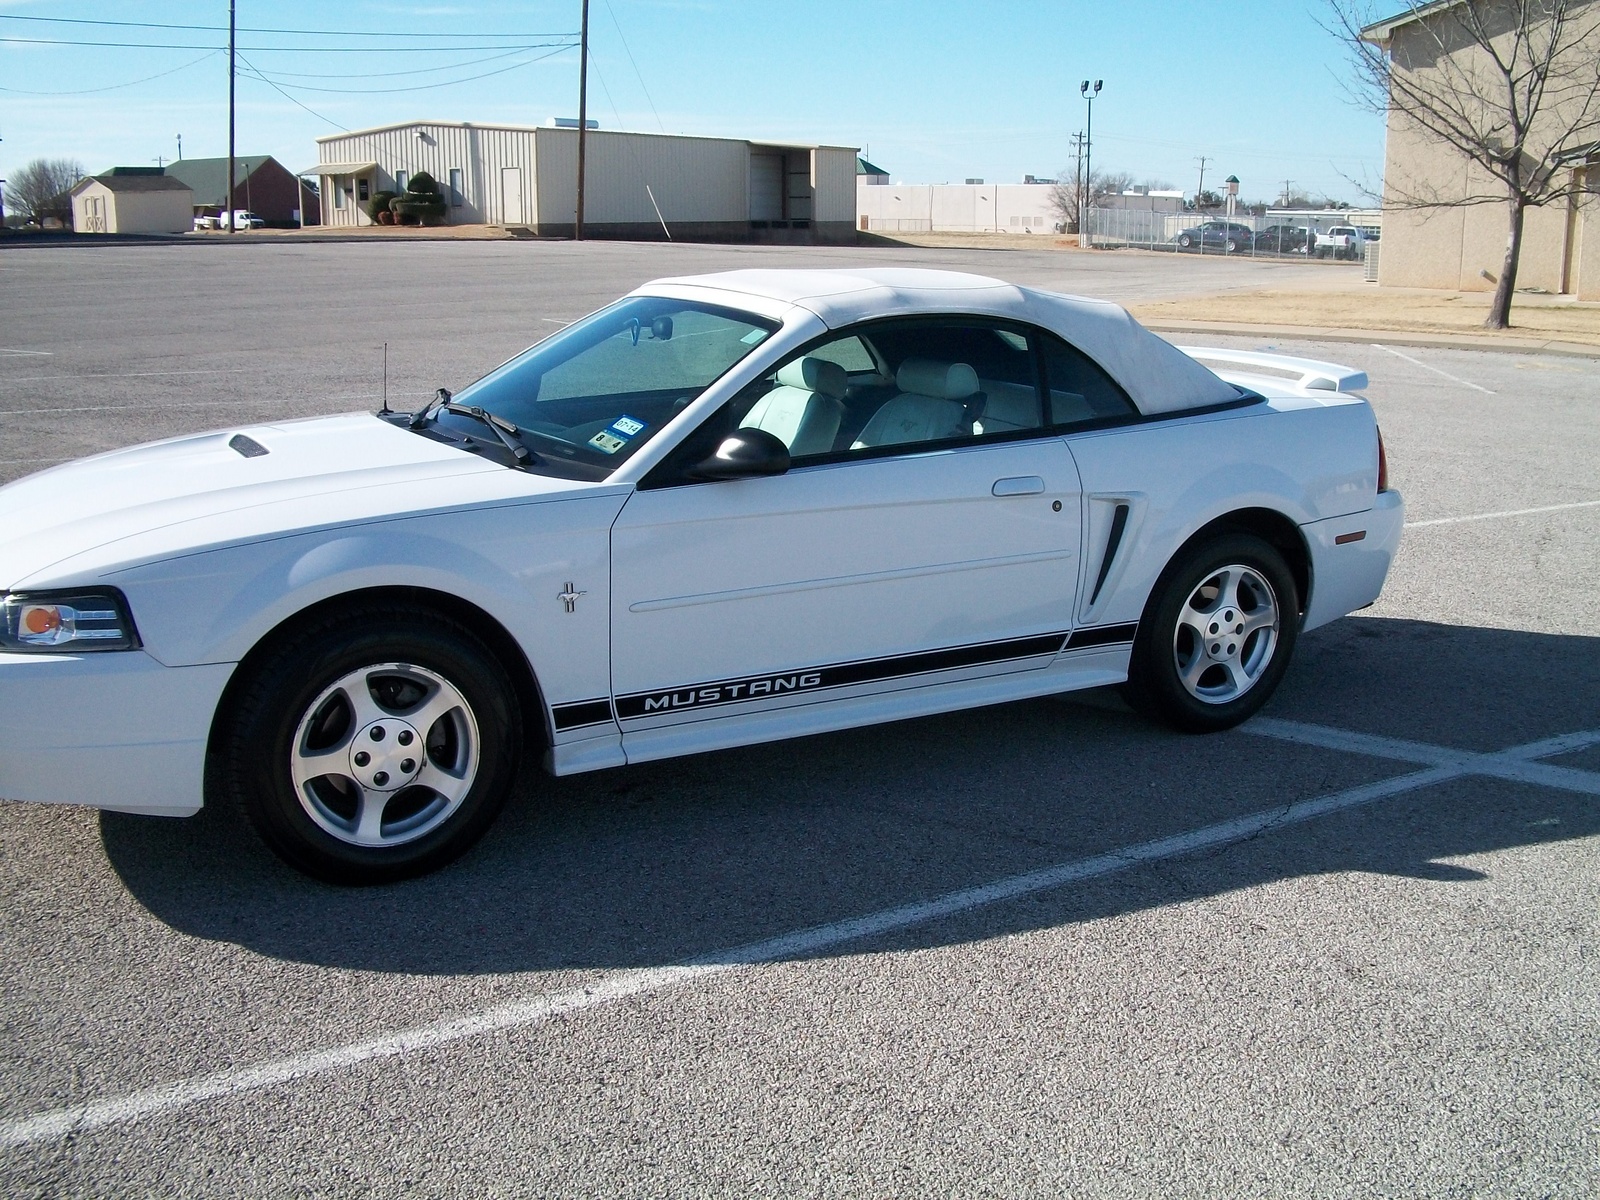 2002 Ford mustang deluxe convertible reviews #3